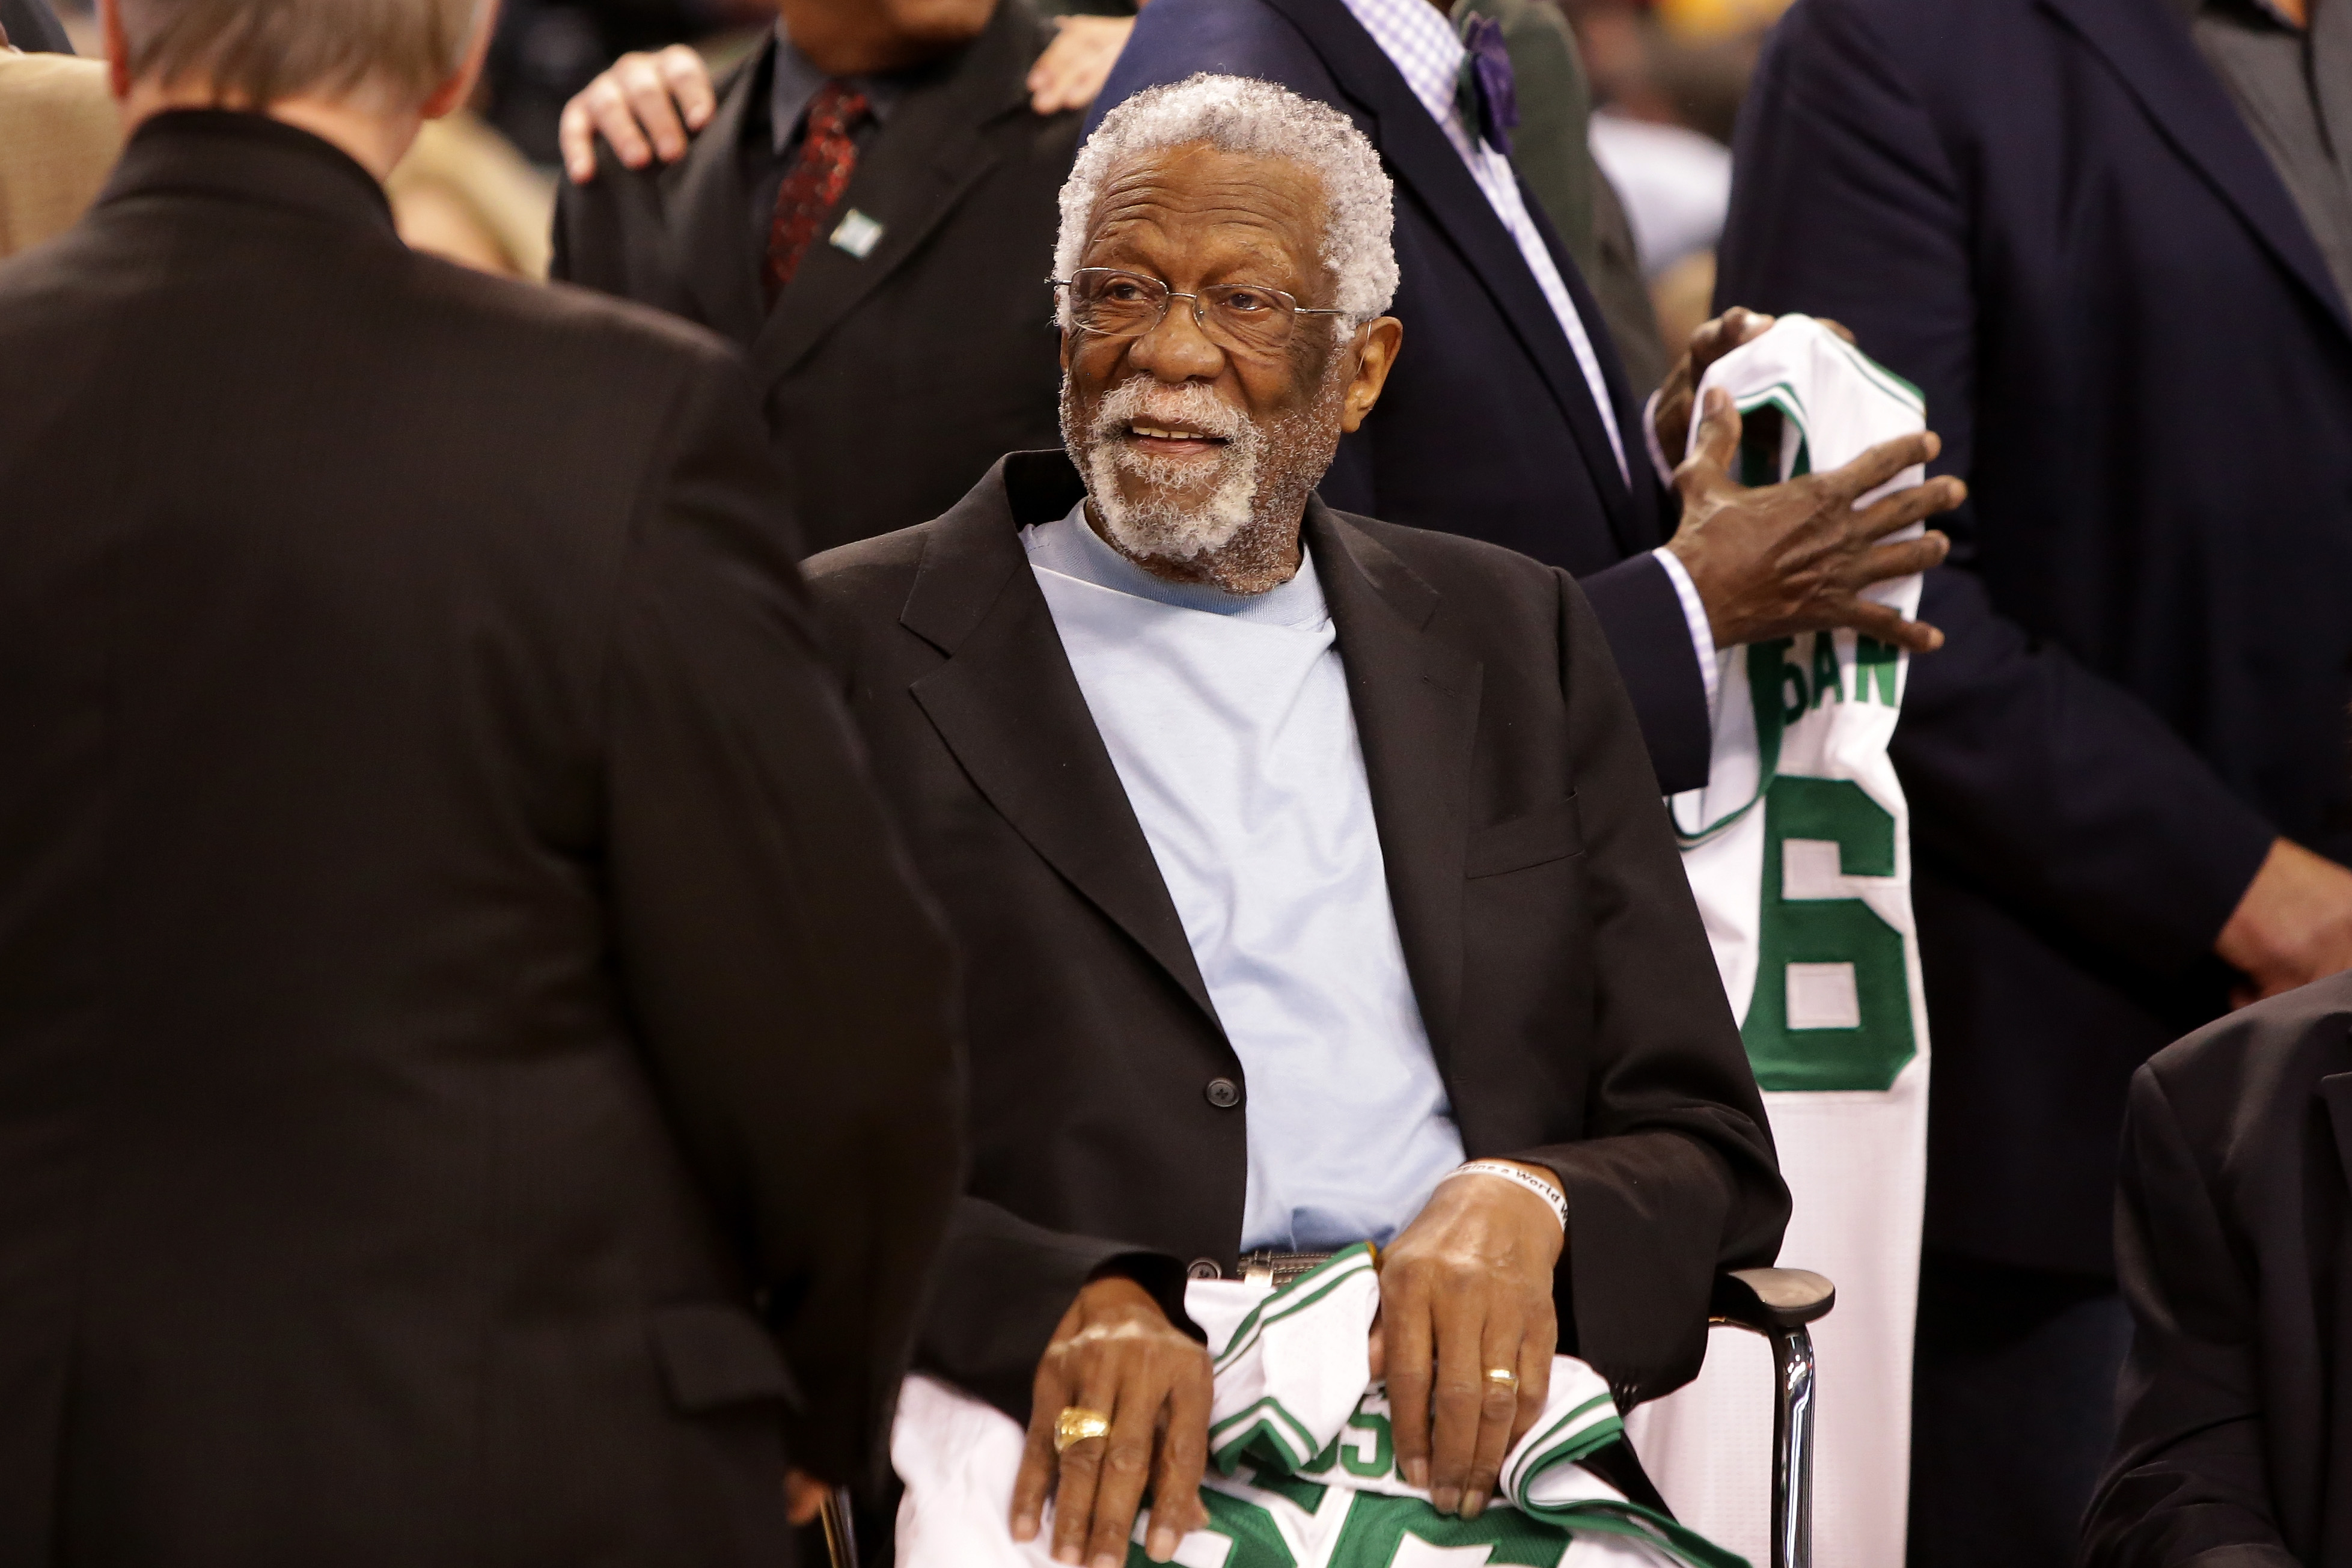 Celtics honor Bill Russell with new City Edition uniform for 2022